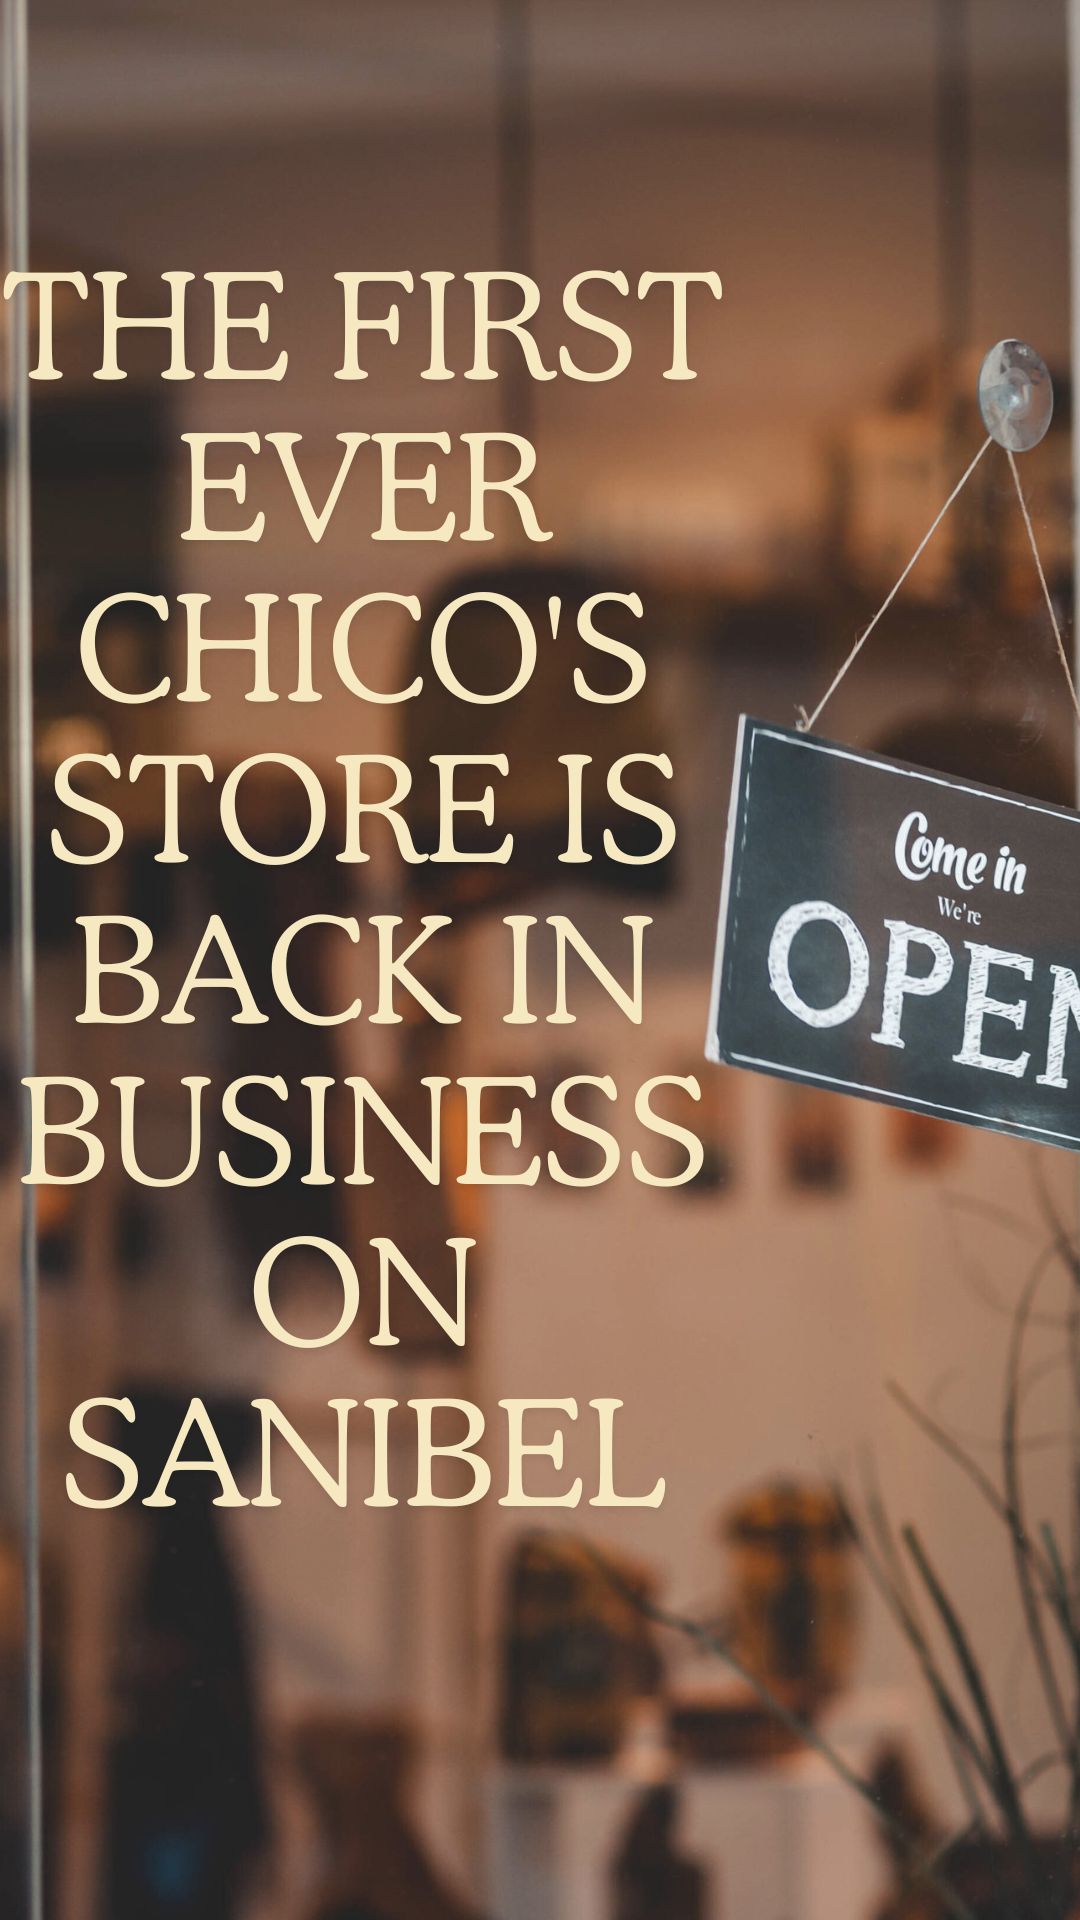 The First Ever Chico's Store is Back in Business on Sanibel